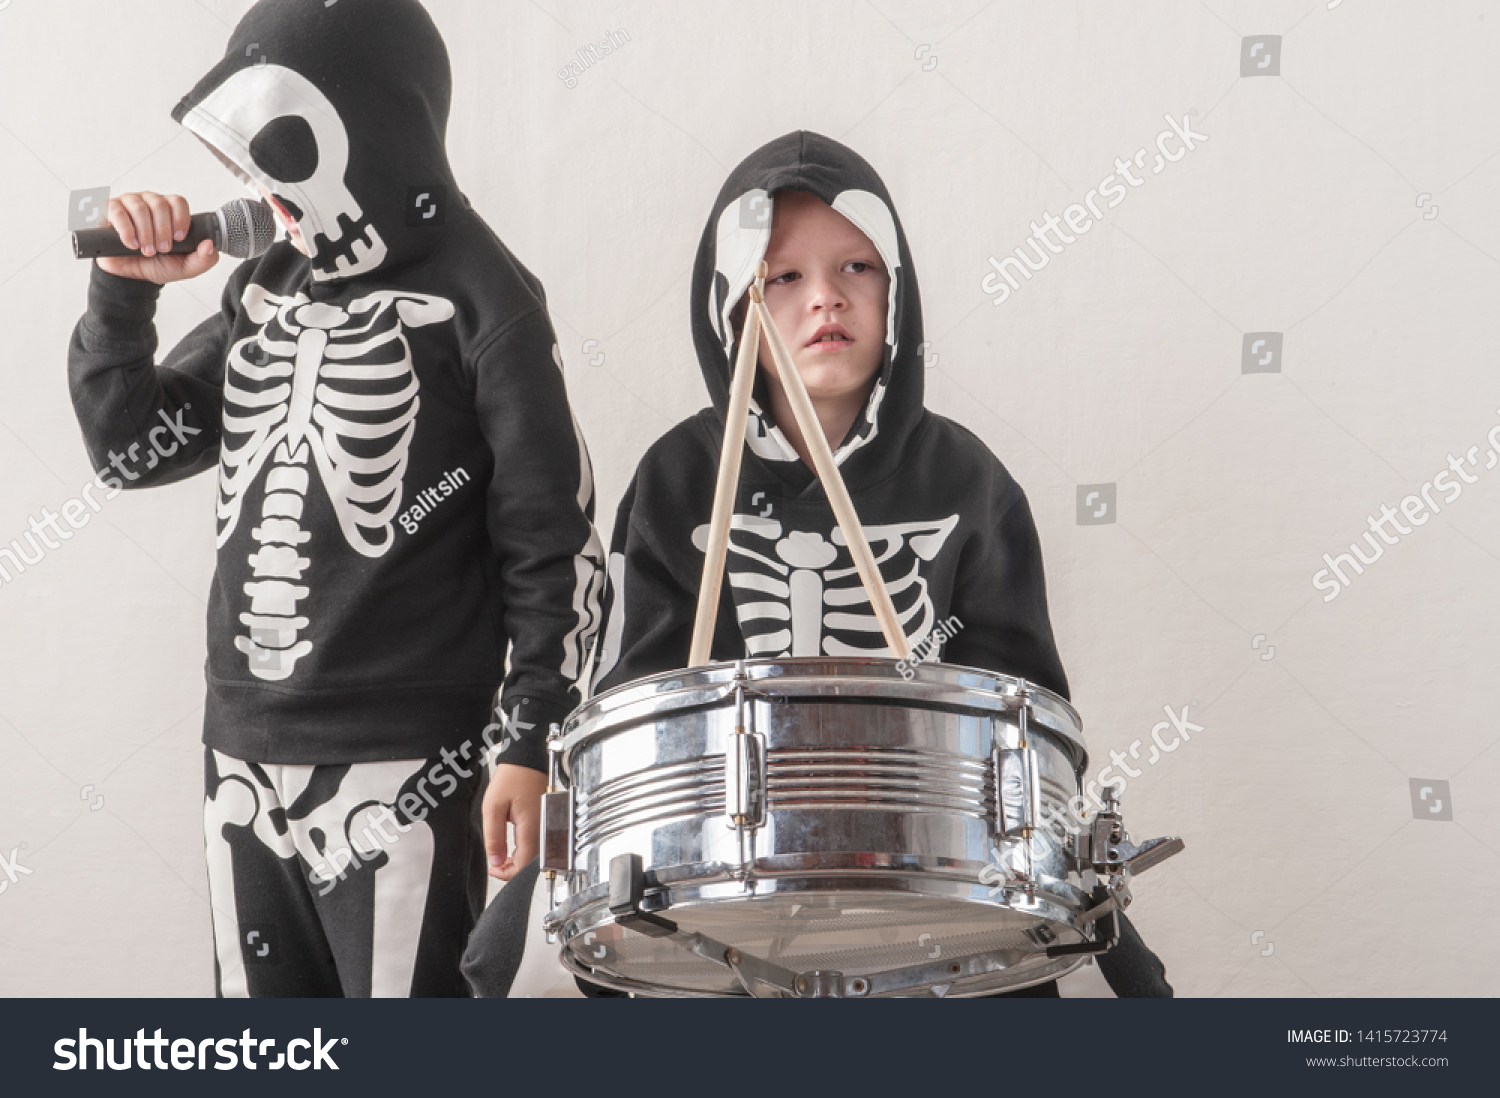 Happy friendly family of musicians in carnival costumes, boys play drum and try to sing with microphone. Black suit with image of skeletons. Classic halloween costume. Funny children #1415723774